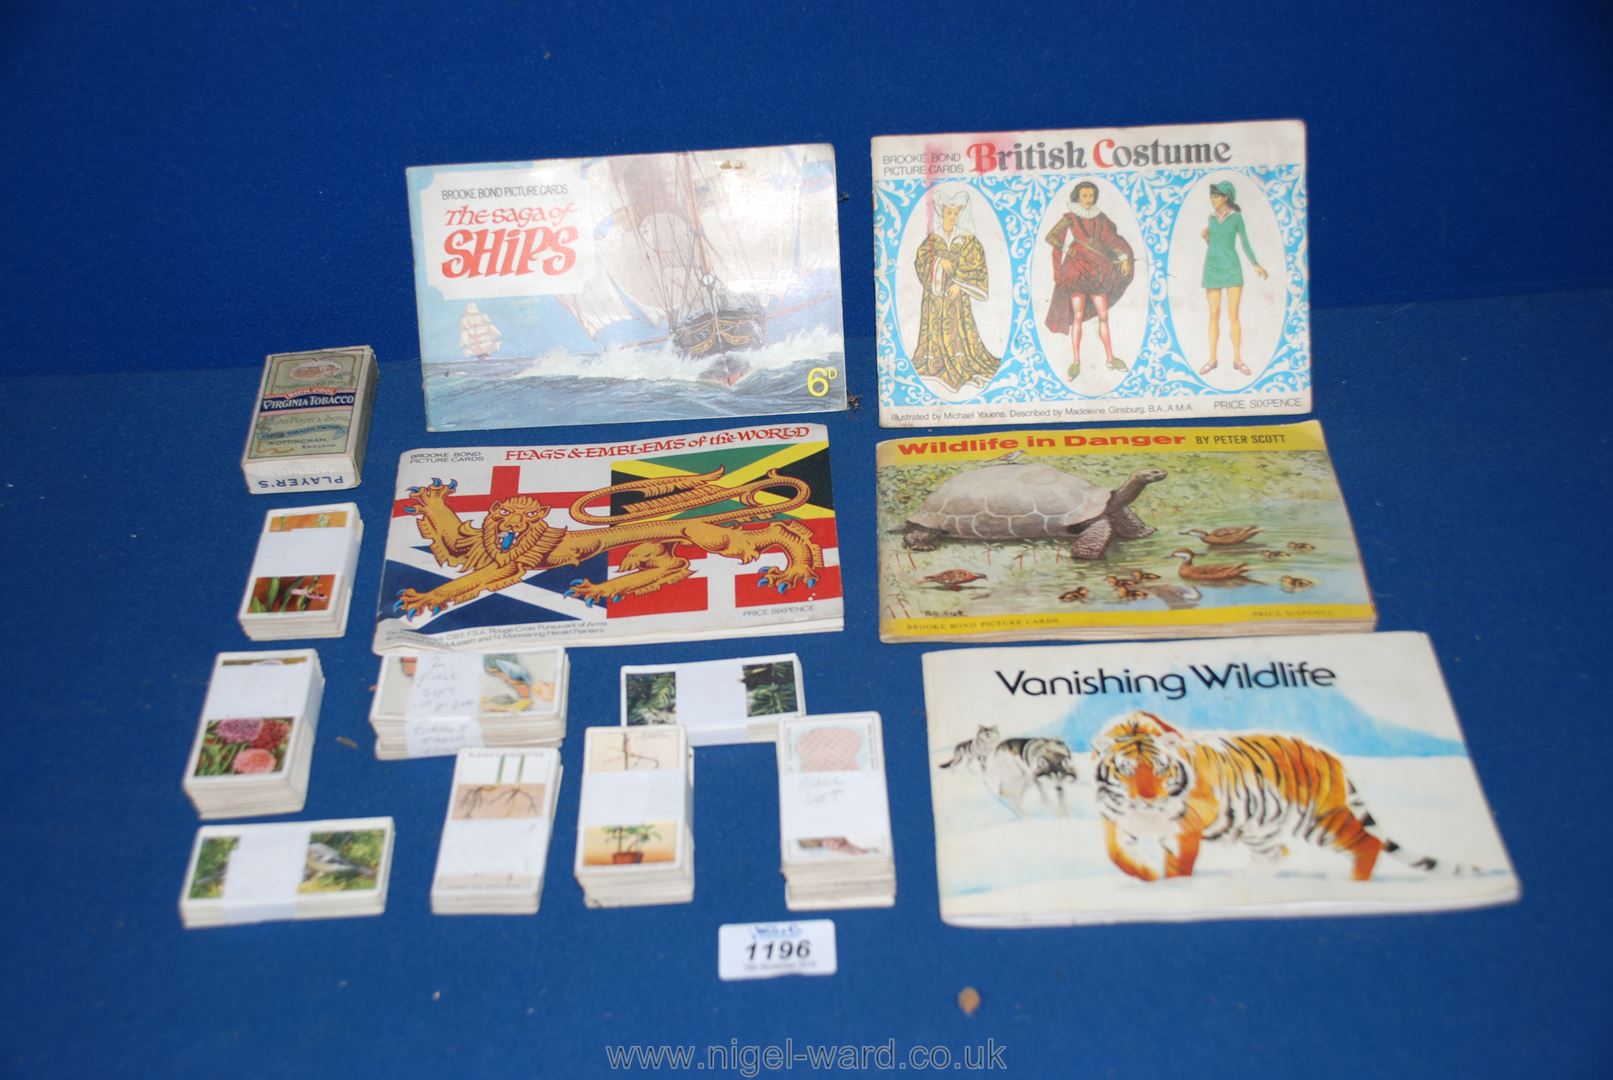 A quantity of Cigarette cards and various books on flags, wildlife, etc.